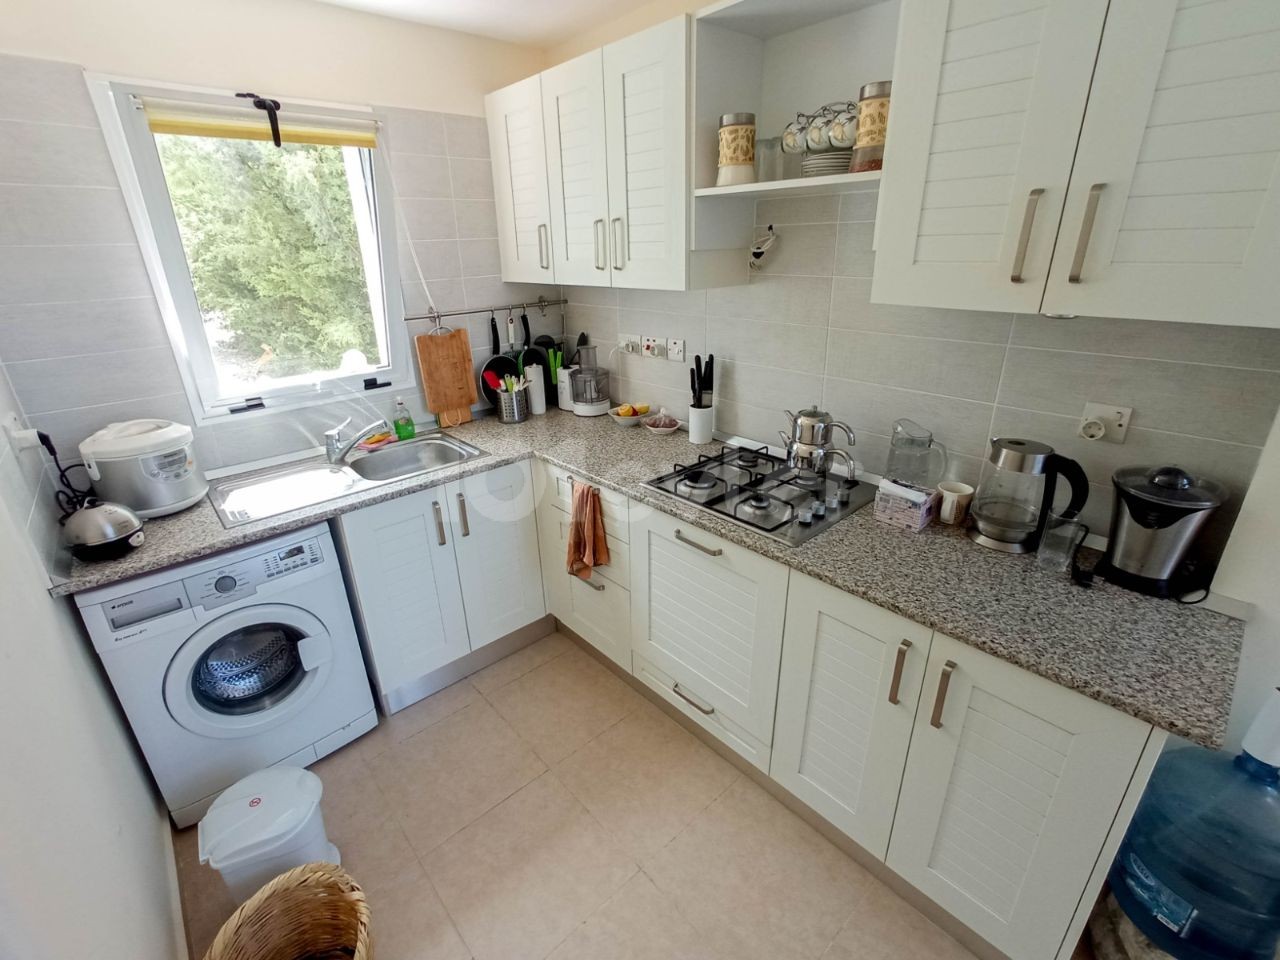 Beautifully presented 2 bedroom duplex apartment on this award winning site 